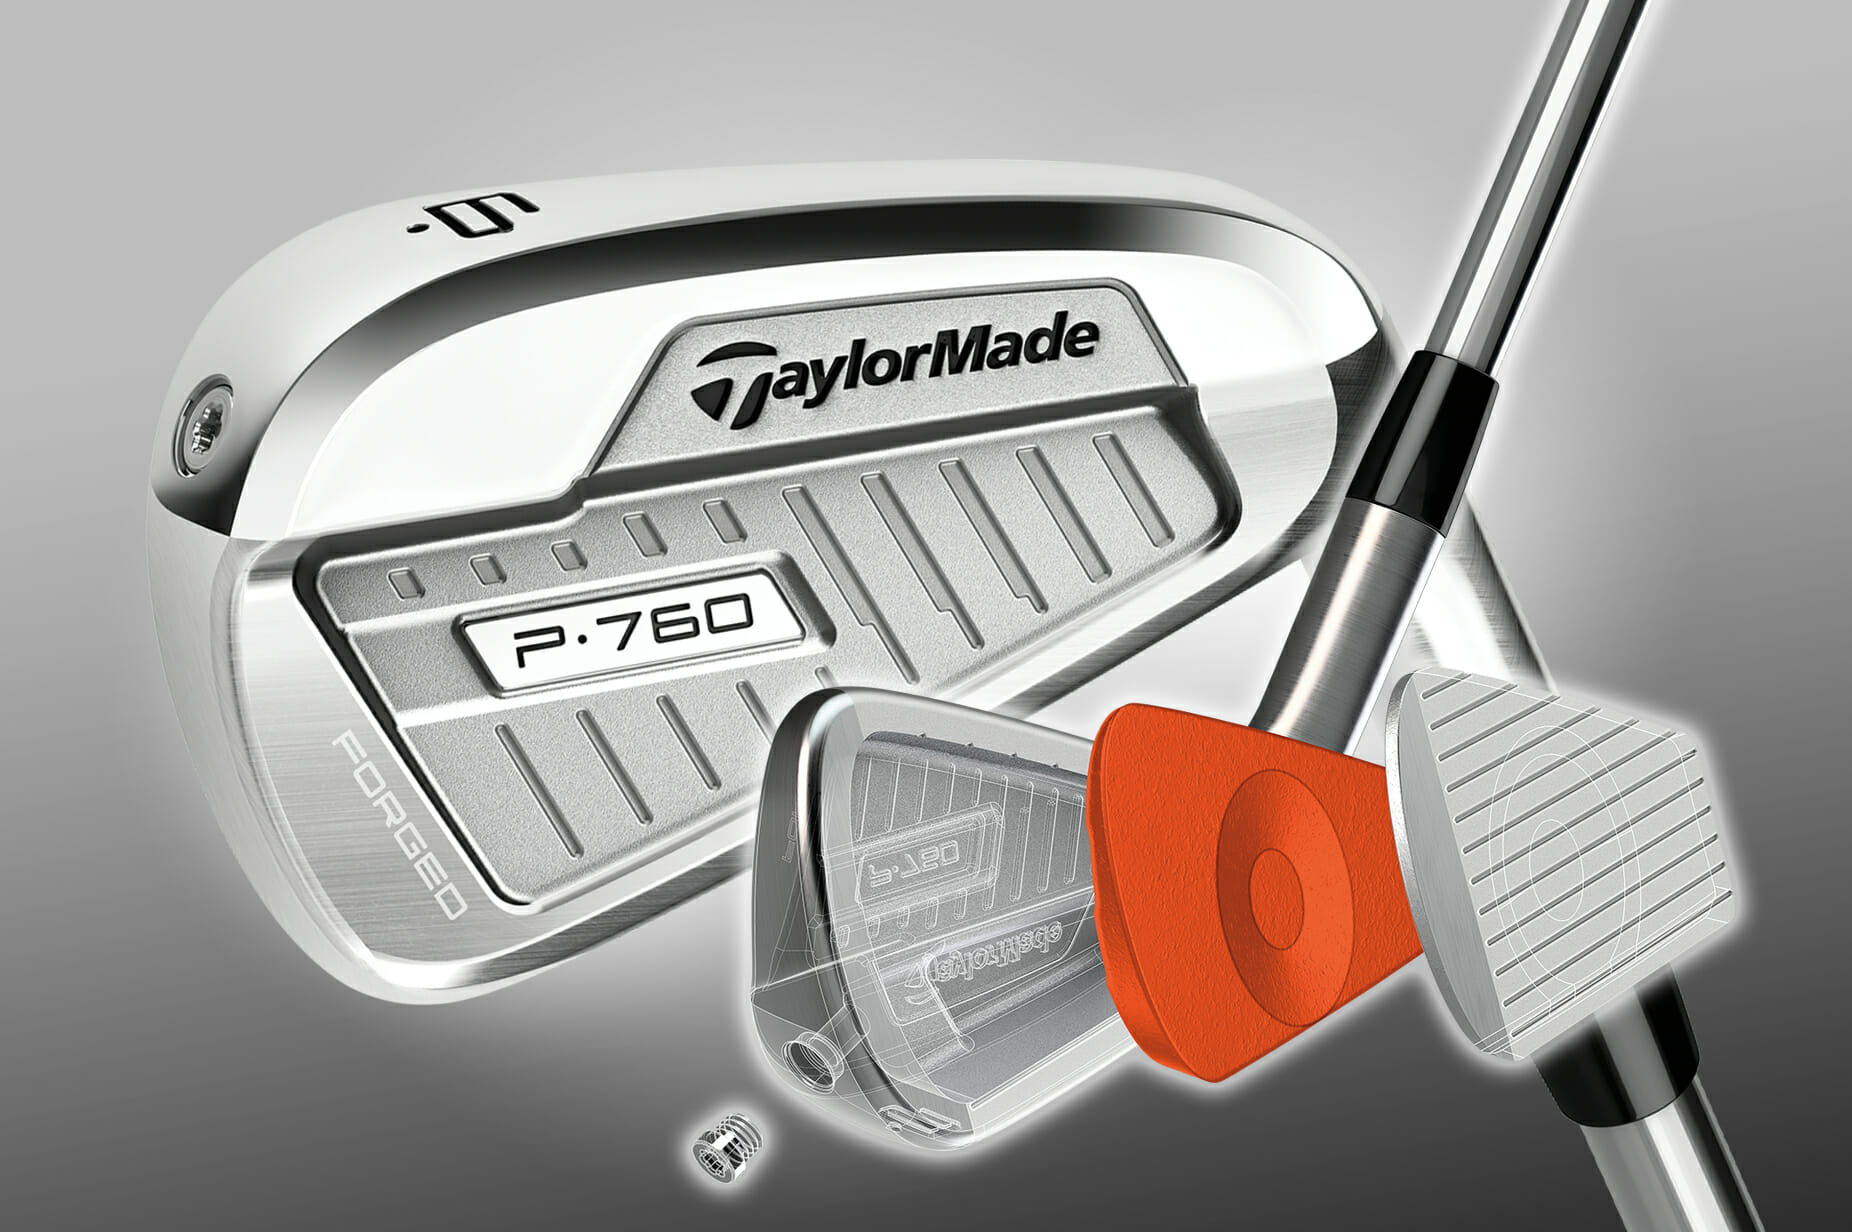 TaylorMade unveil their new P760 progressive irons